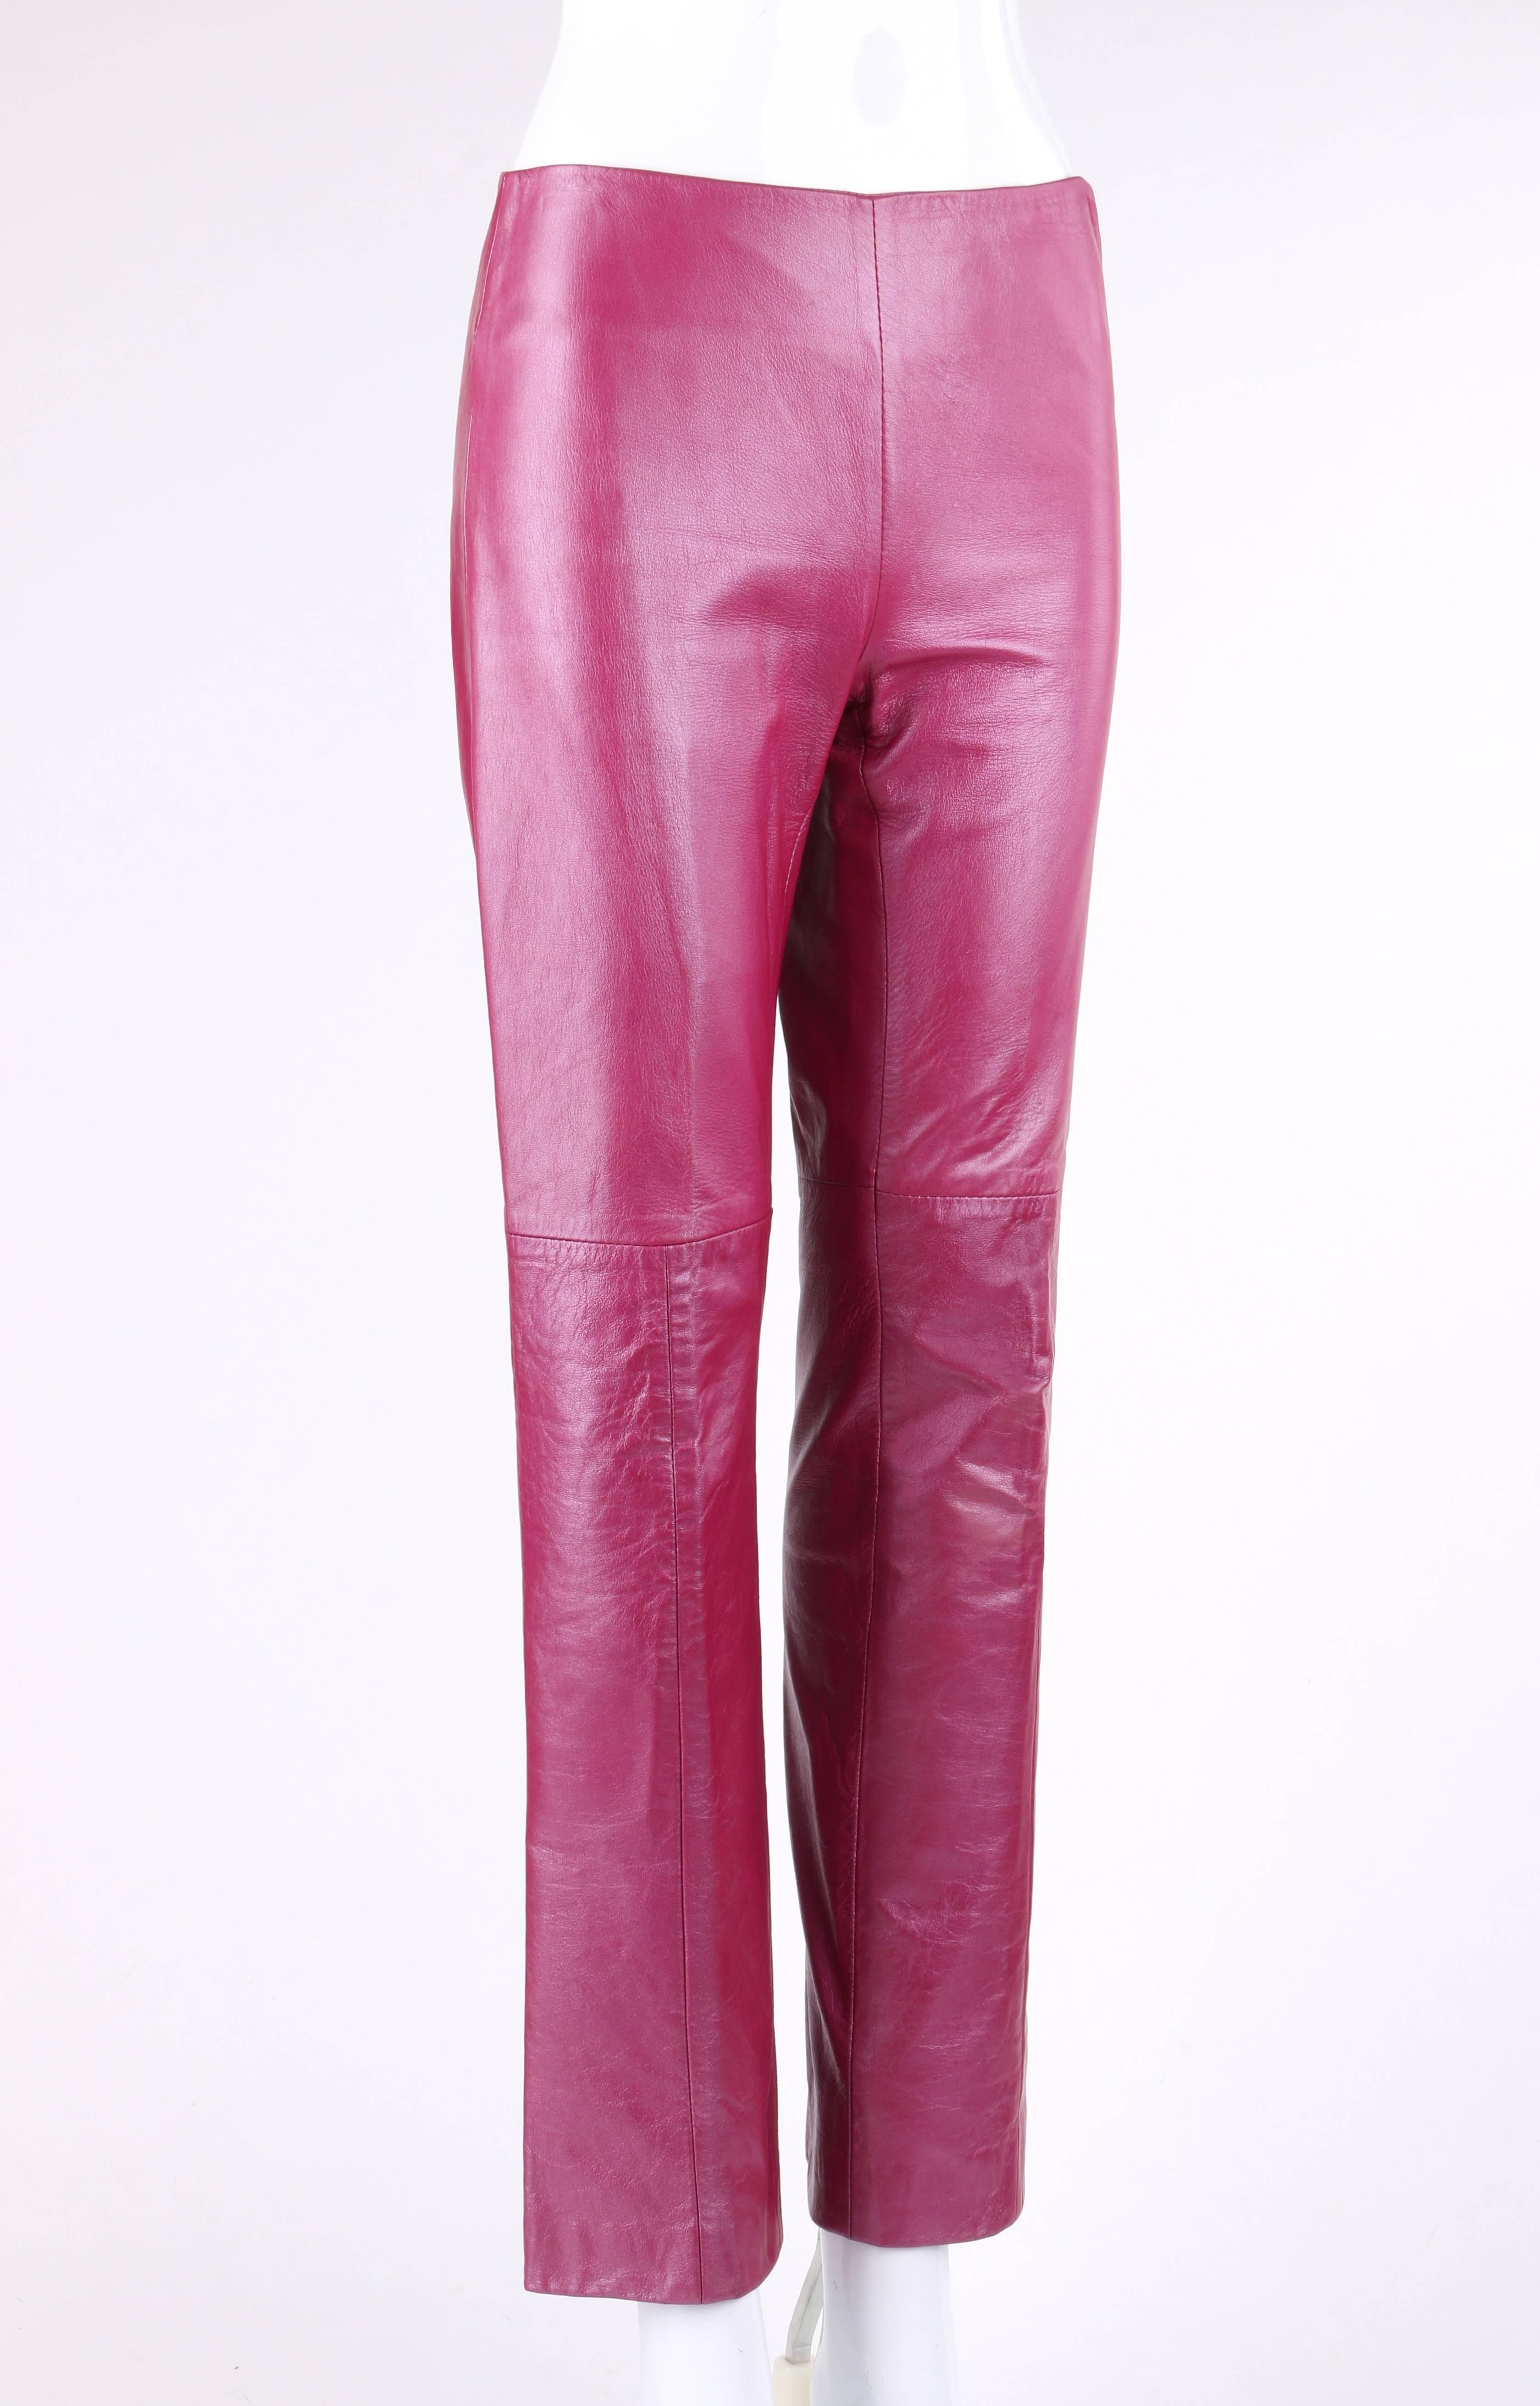 Versace Jeans Couture magenta pink leather boot cut pants. Designed by Donatella Versace. Left side seam invisible zipper closure with silver-toned metal medusa head zipper pull. Boot cut style. Partially lined. Marked Fabric Content: 